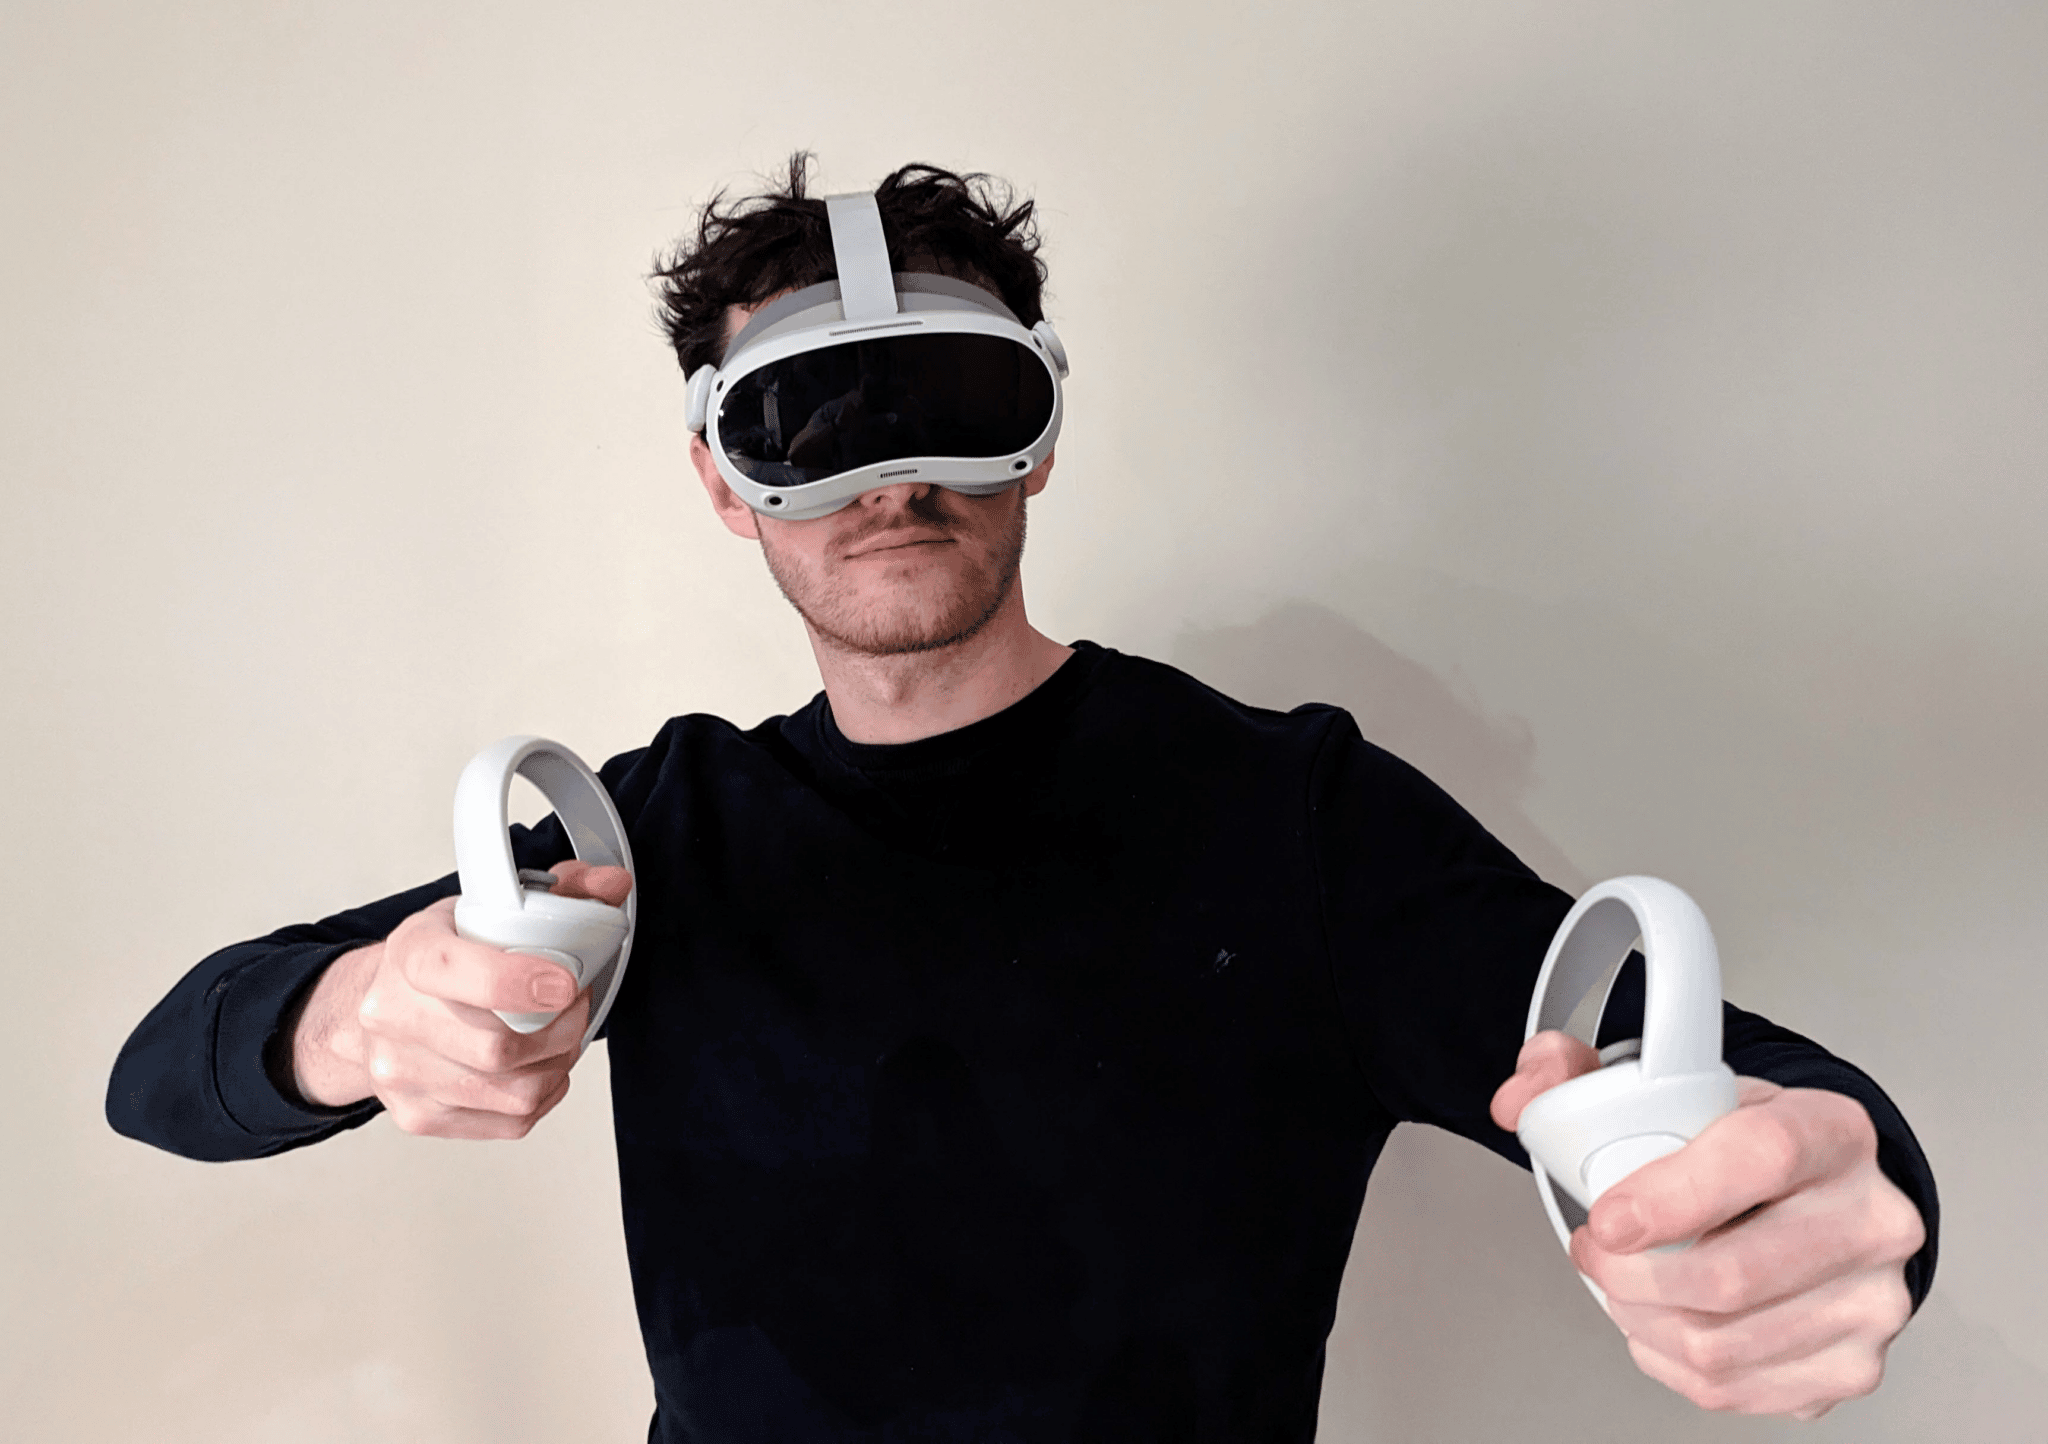 Oculus Quest 2 Review: Solid V.R. Headset, but Few Games - The New York  Times